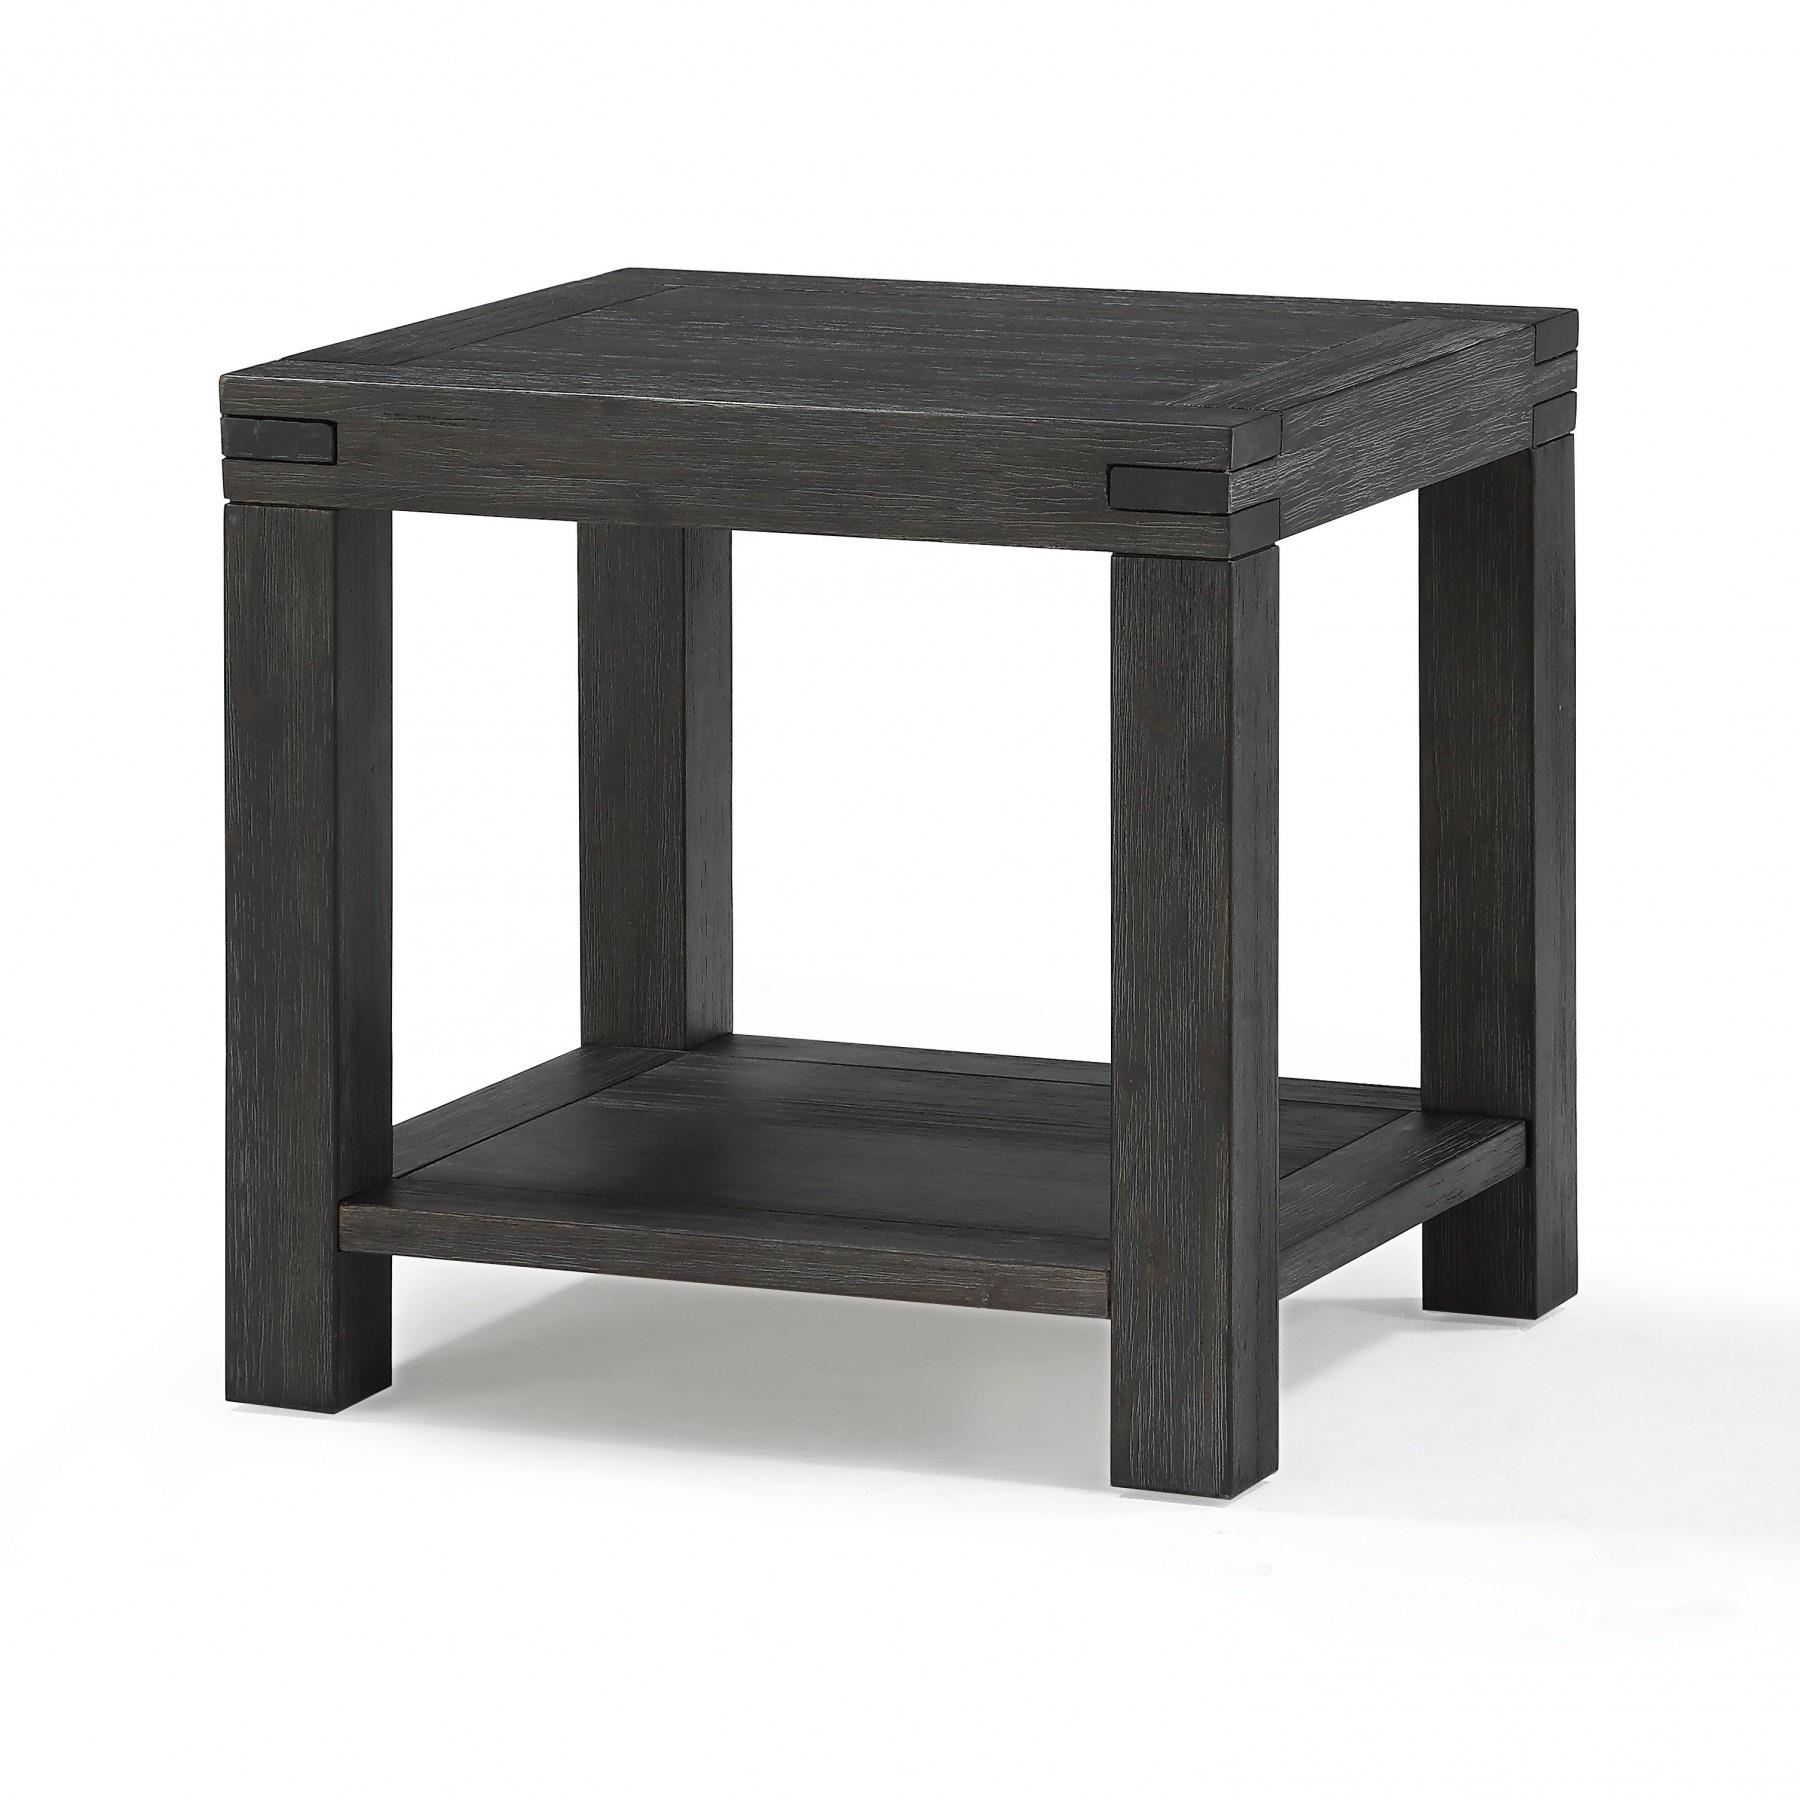 Rustic End Table MEADOW 3FT322 in Graphite 